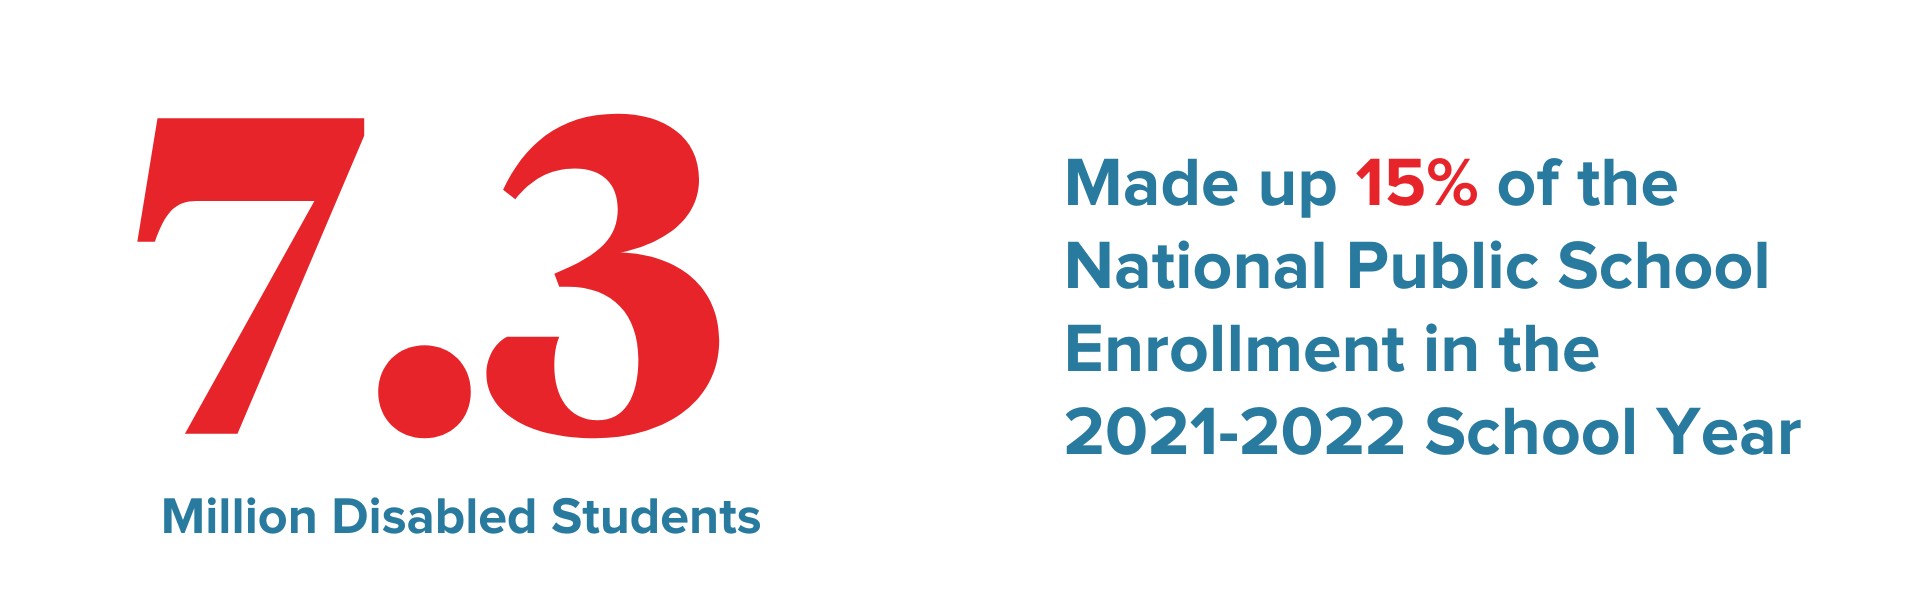 7.3 million disabled students made up 15% of the National Public School Enrollement in the 2021-2022 School Year